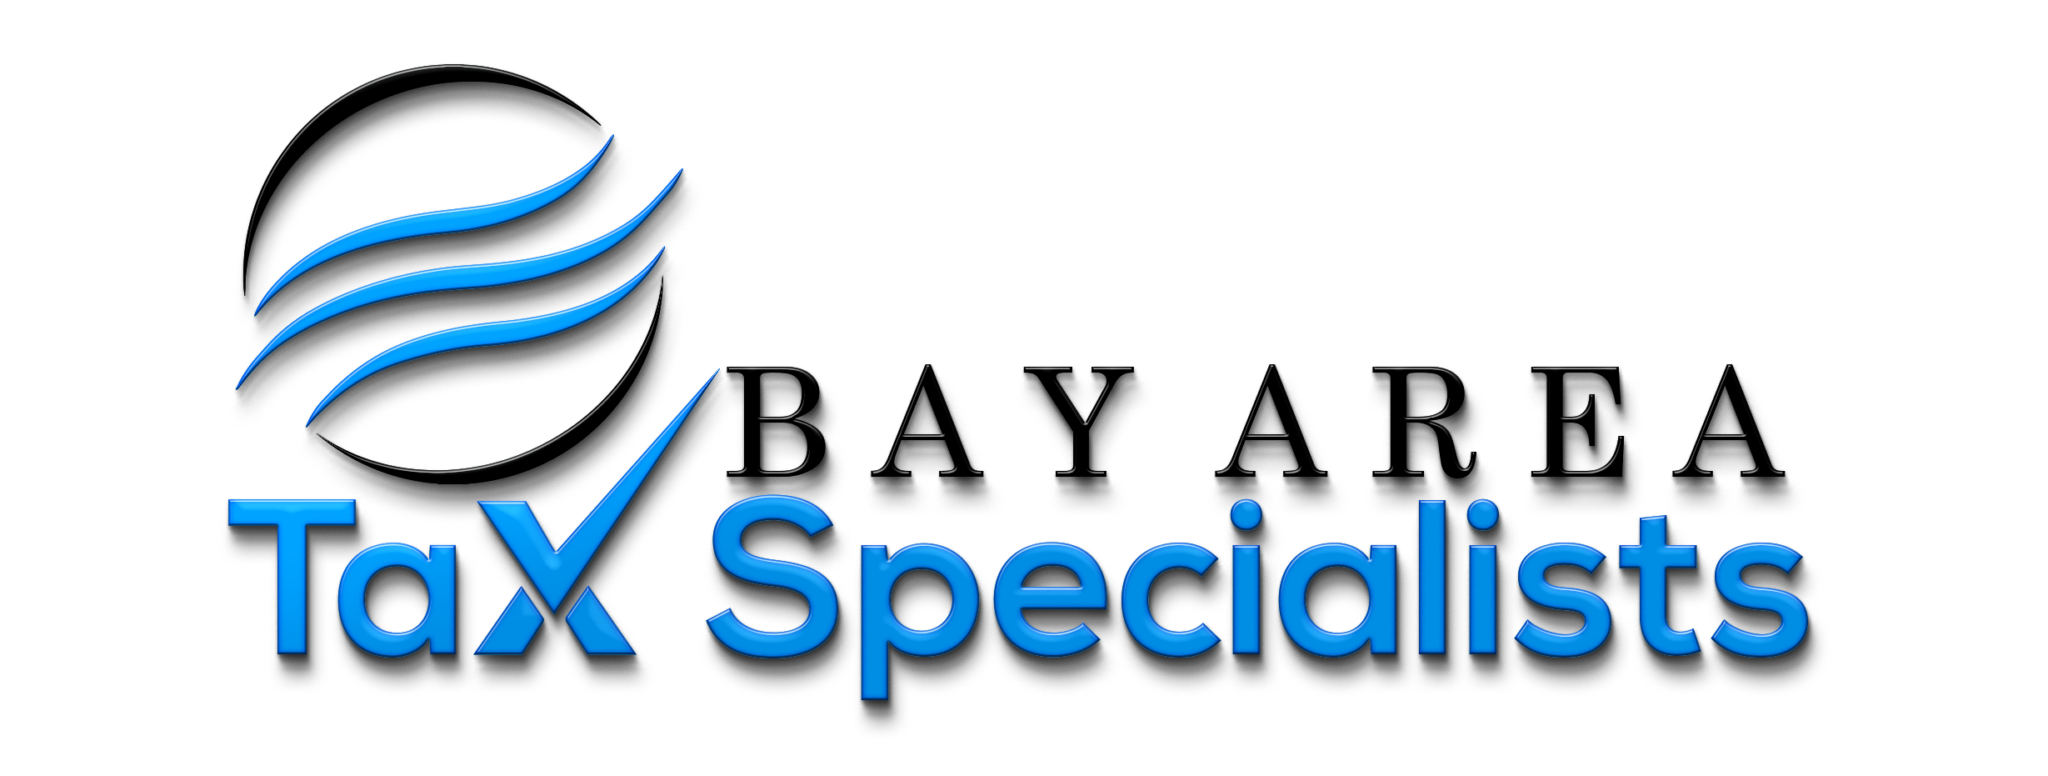 Bay Area Tax Specialists